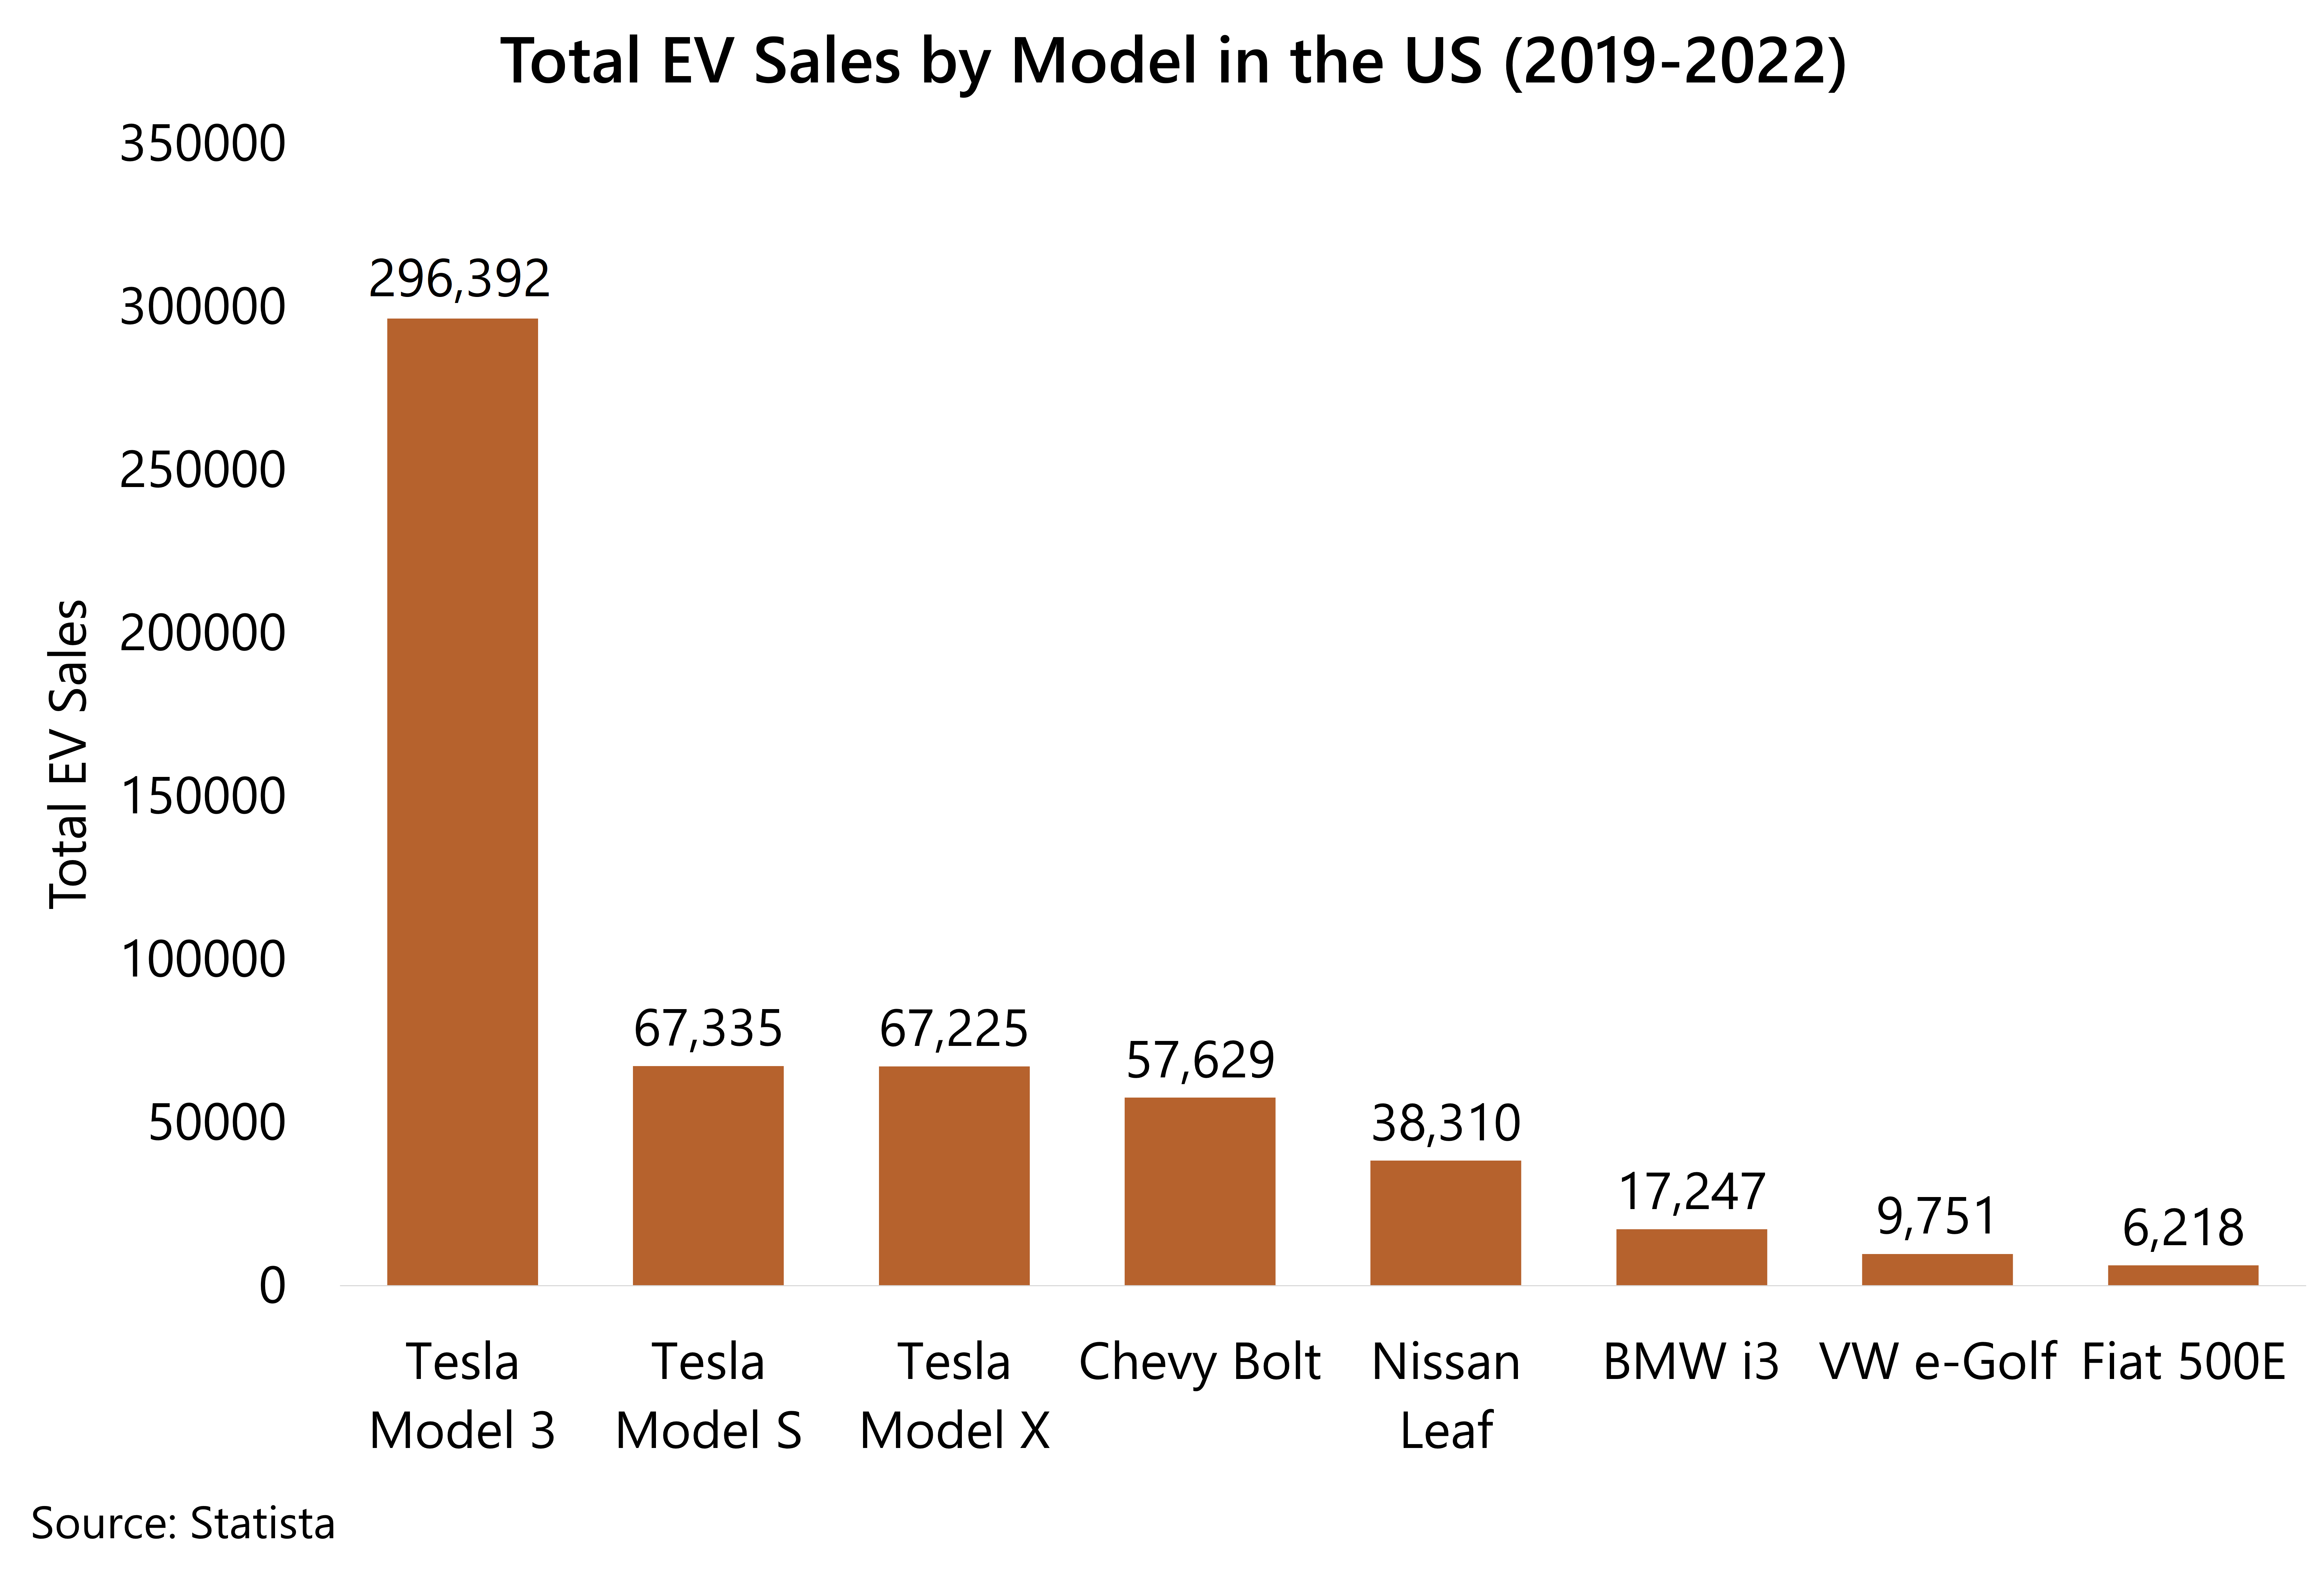 Tesla Model 3 becomes the highest-selling electric vehicle in the American market -Buyers do not mind its prestige pricing.